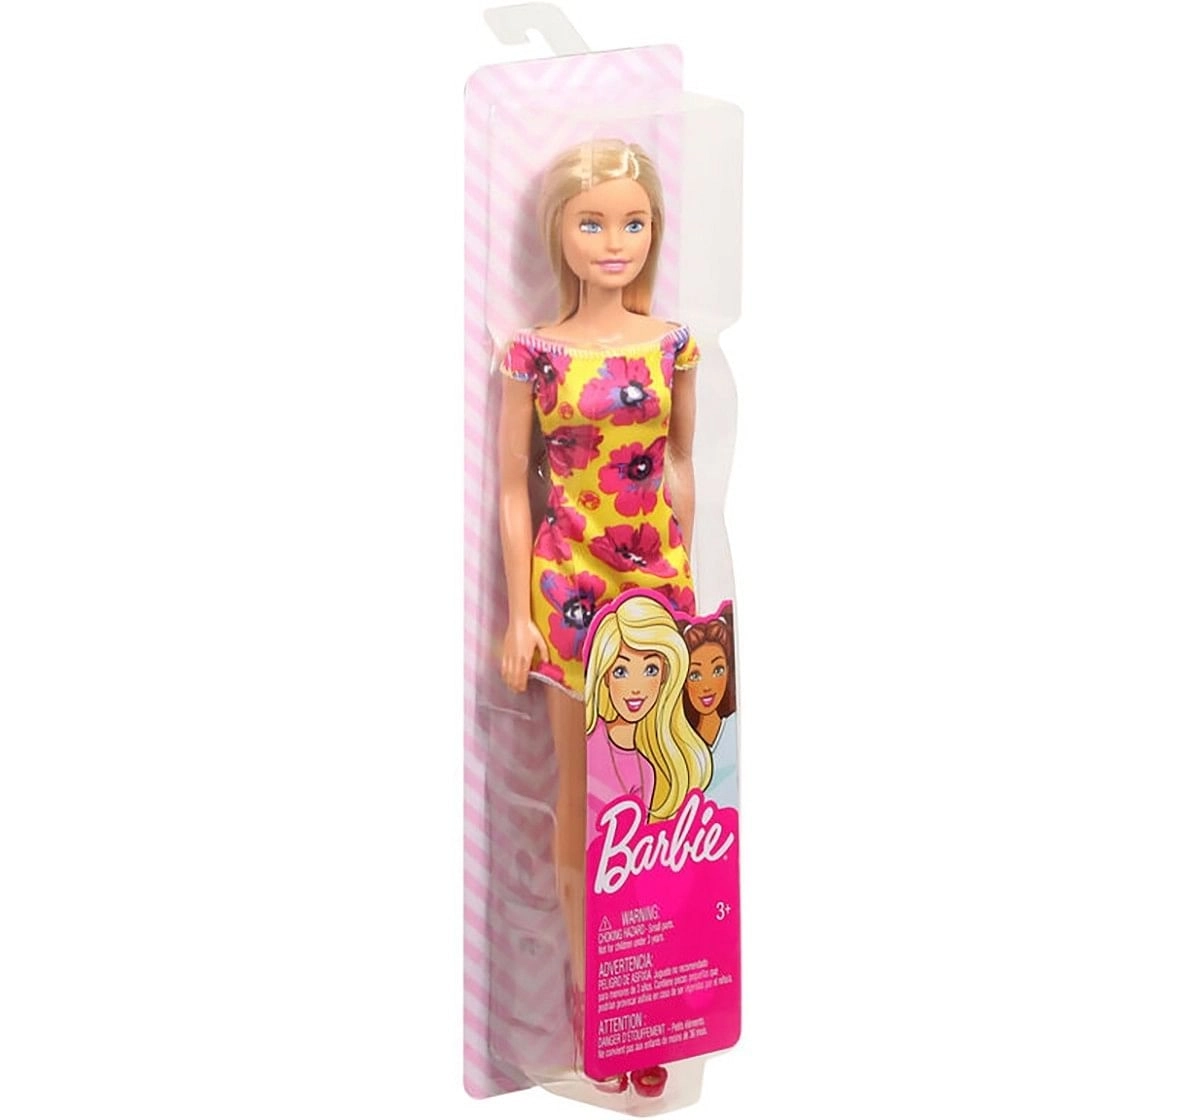  Barbie Doll With Floral Dress, Dolls & Accessories for Girls age 3Y+, Assorted